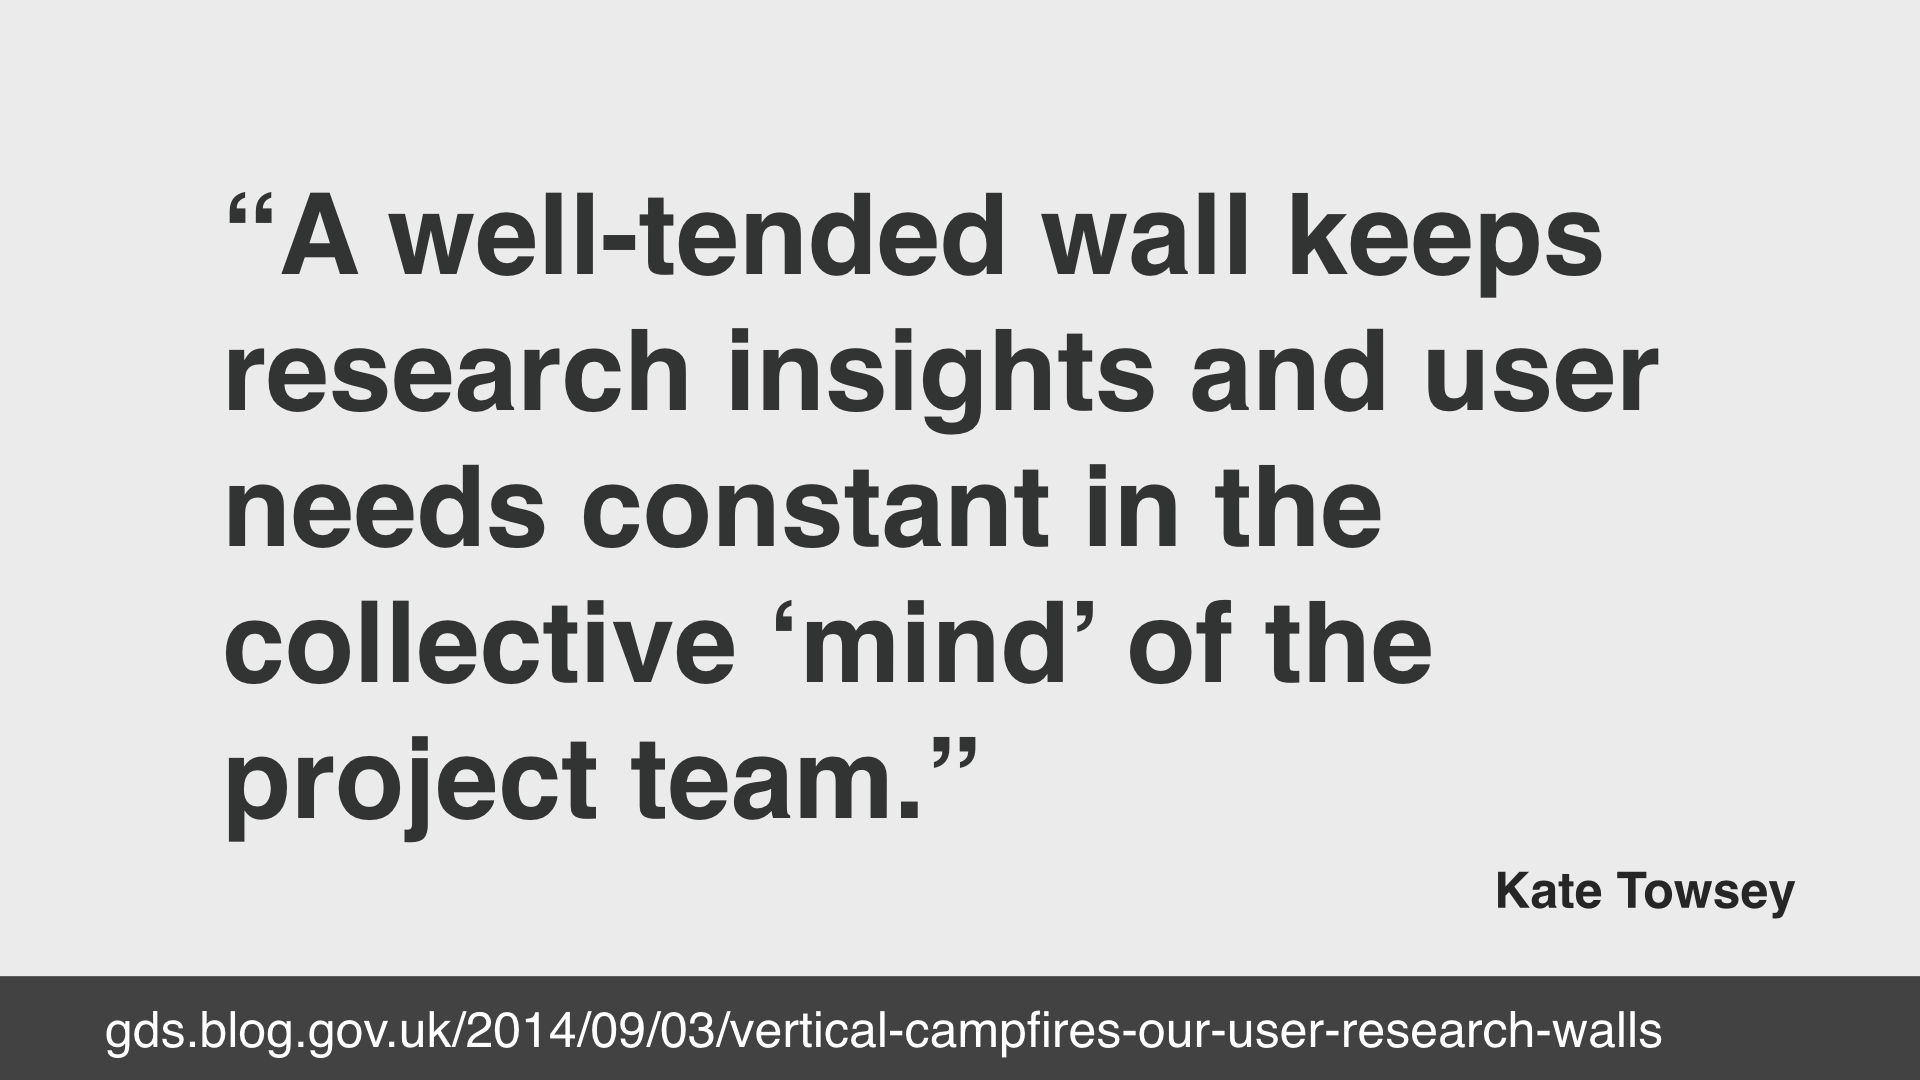 Kate Towsey quote: "A well tended wall keeps research insights and user needs constant in the collective mind of the project team"